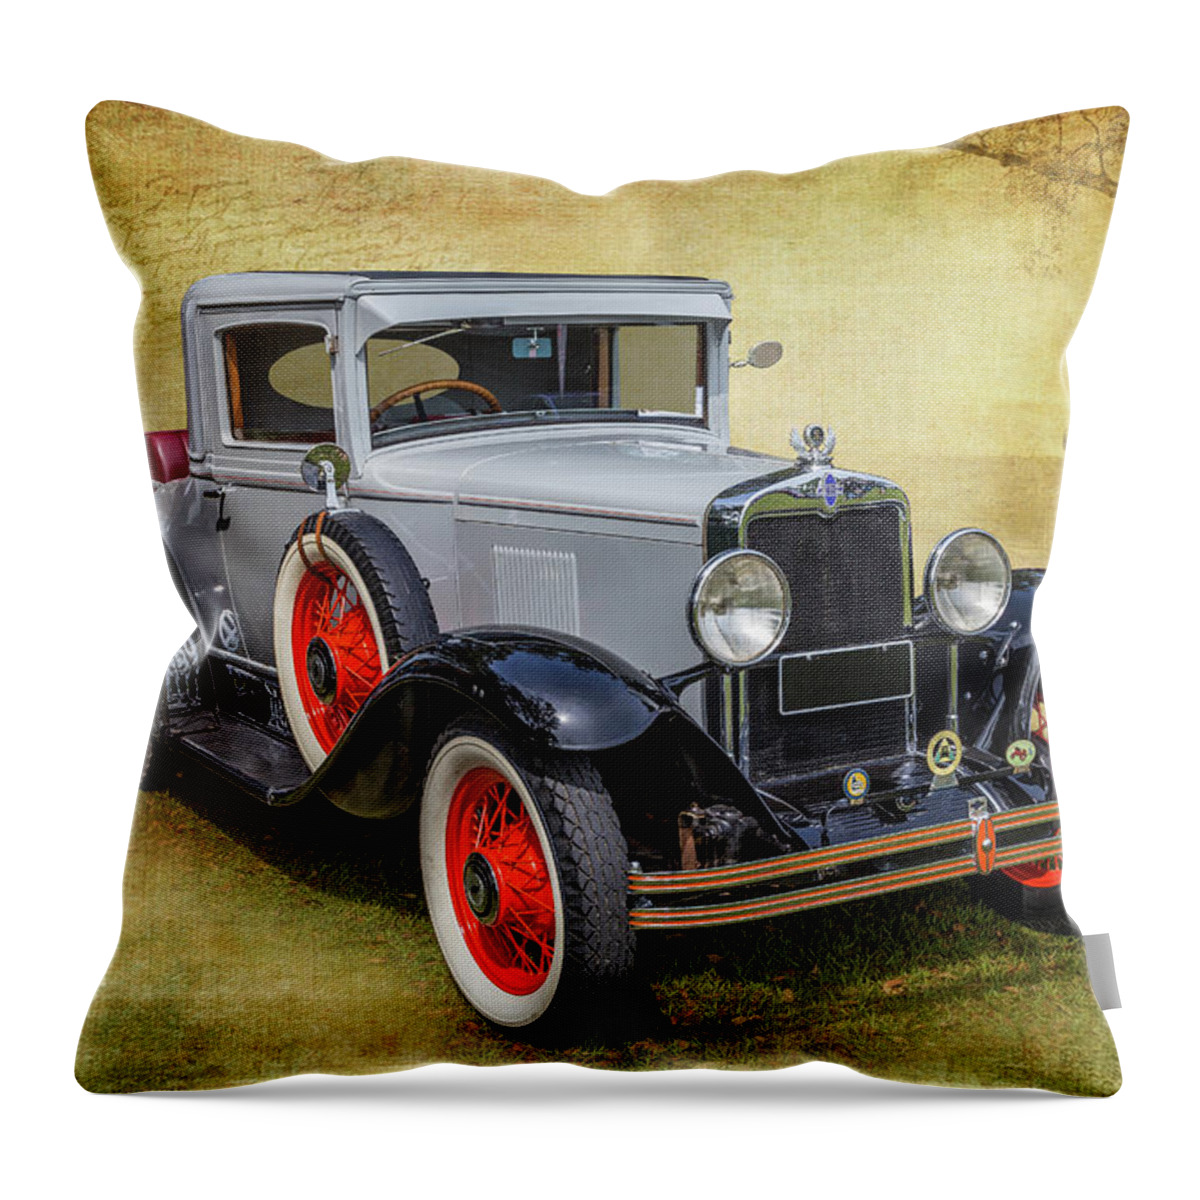 Car Throw Pillow featuring the photograph Vintage Chev by Keith Hawley